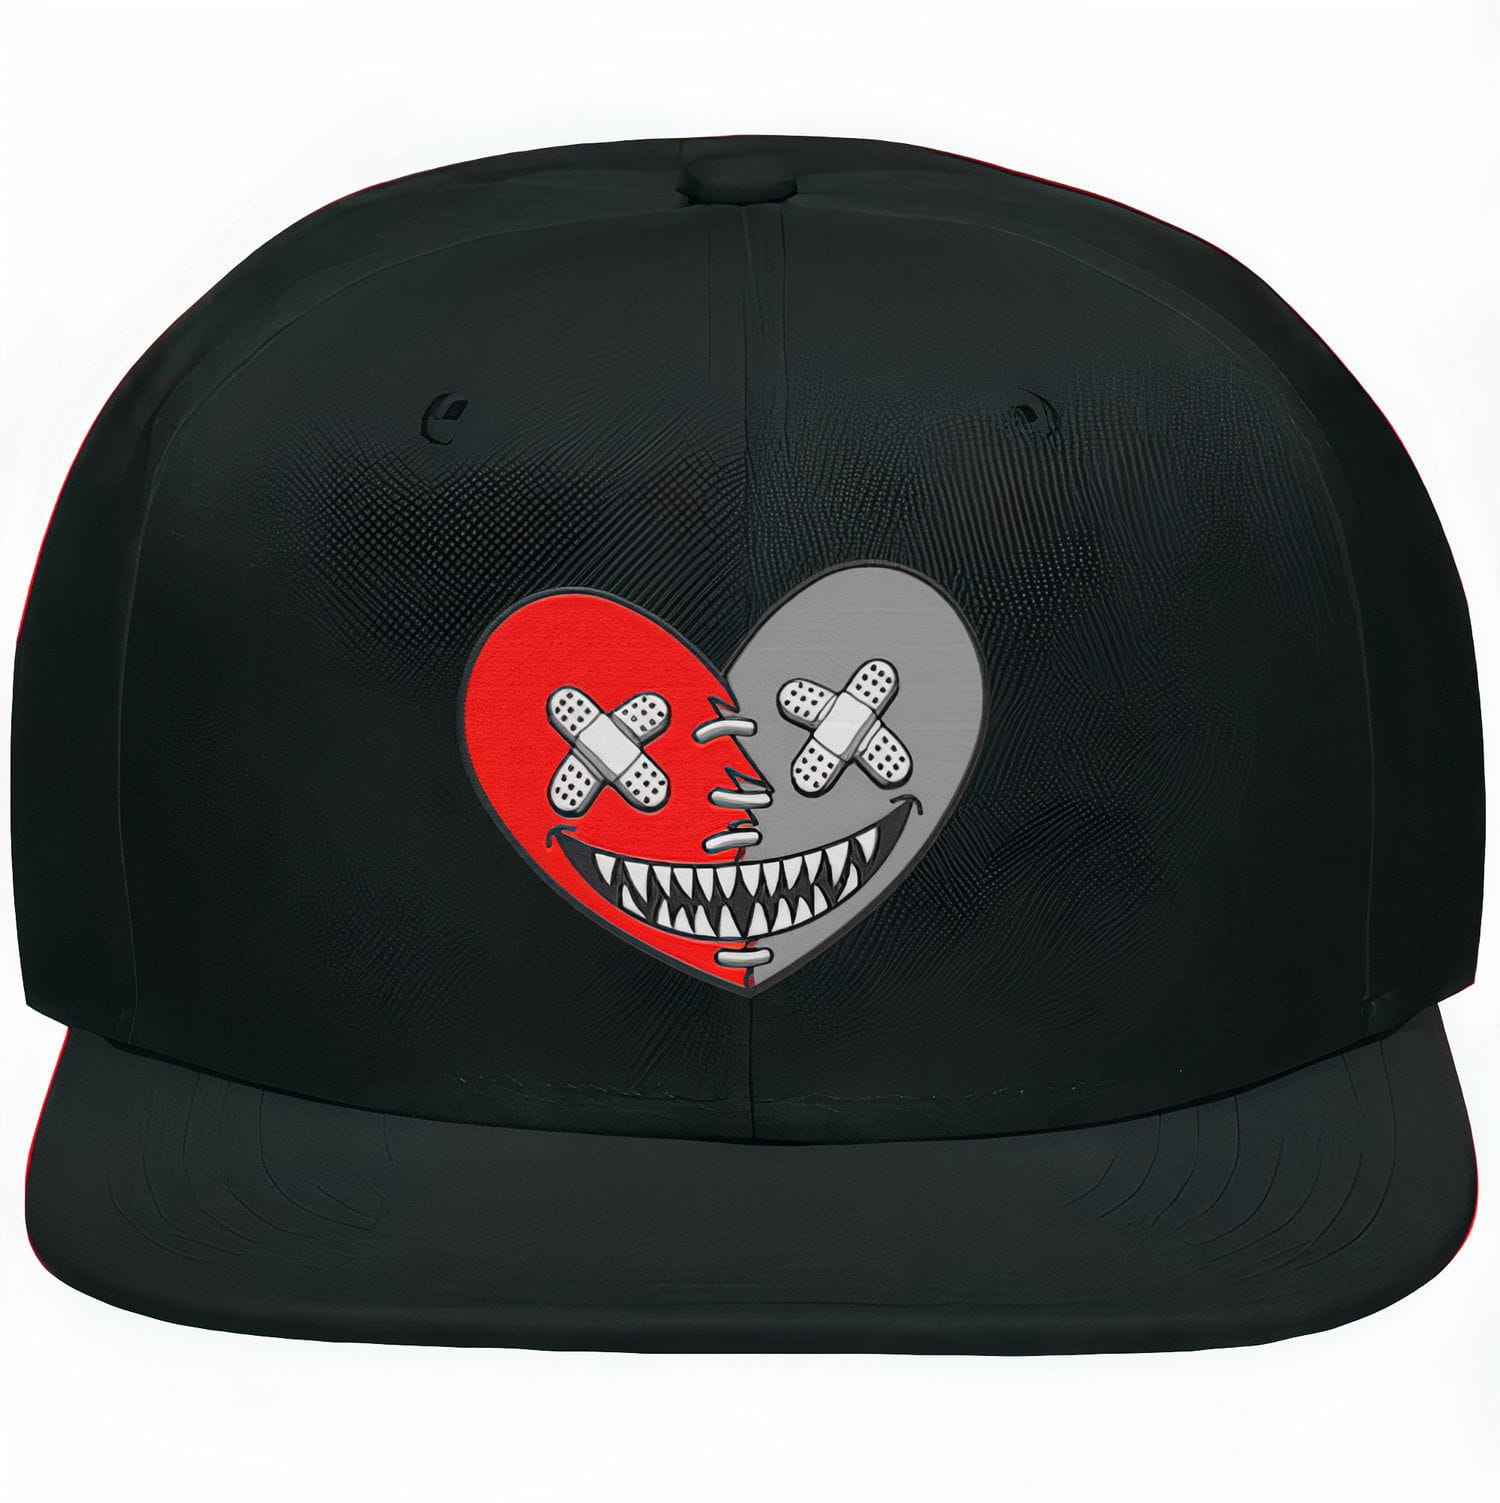 Red Taxi 12s Snapback Hat - Jordan 12 Red Taxis Hats - Heart